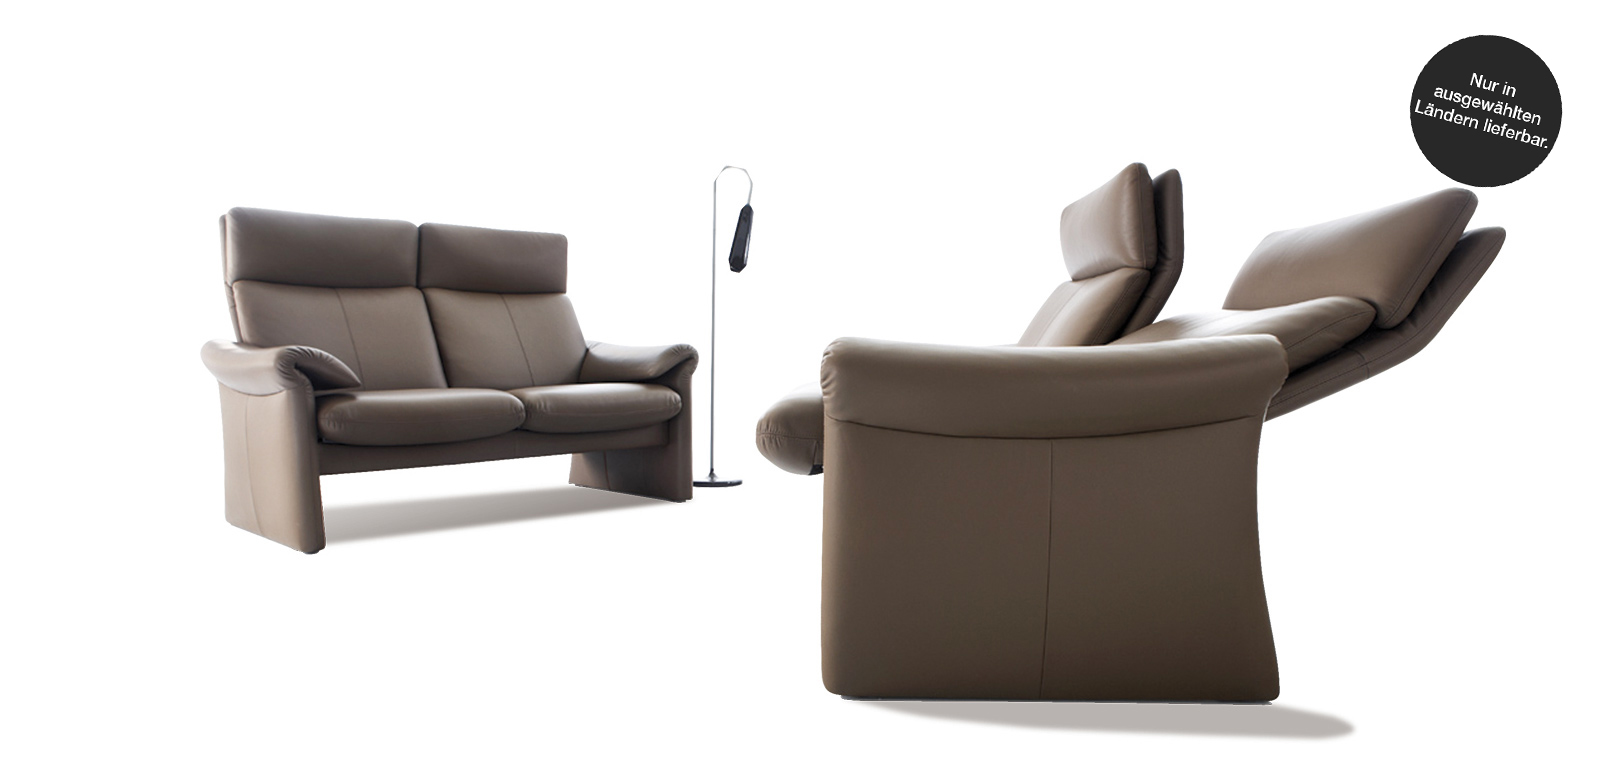 Two Milano sofas with different backrest positions.